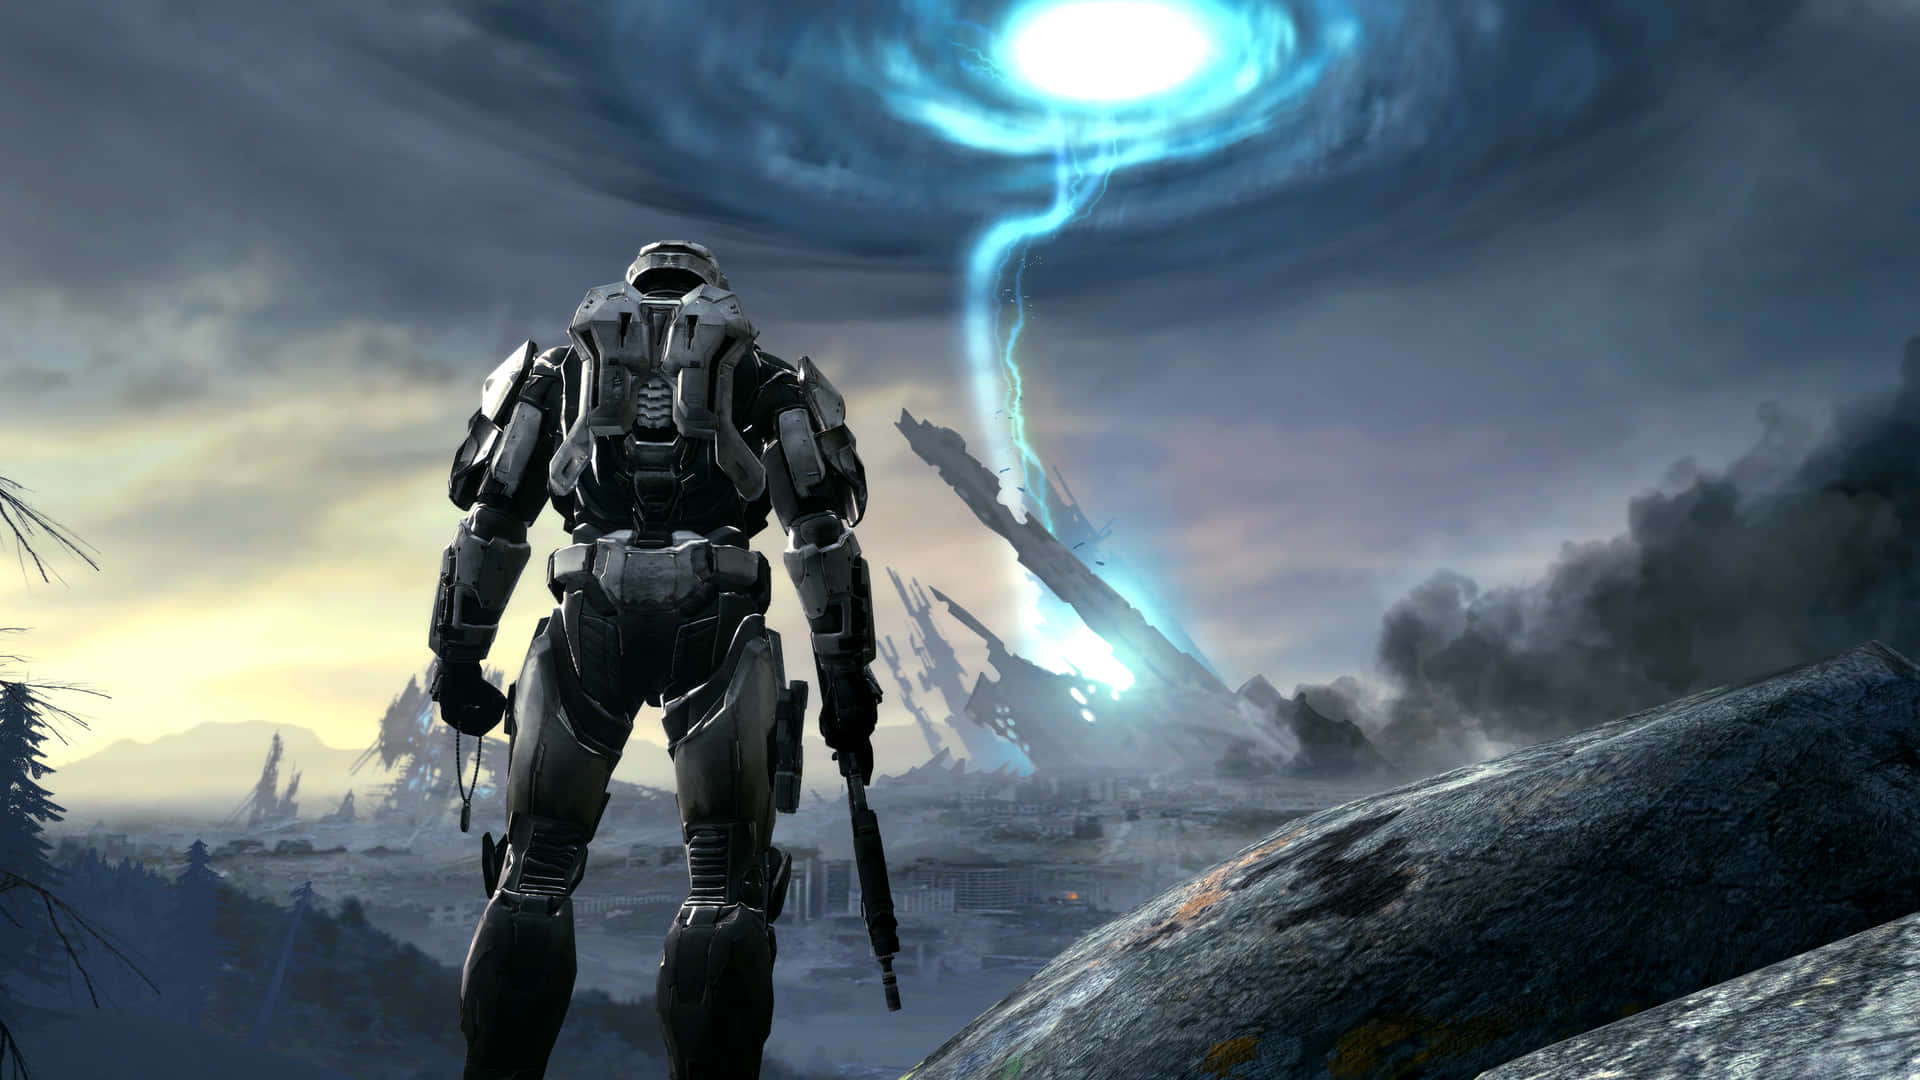 Halo 3 Wallpapers - Halo 3 Wallpapers